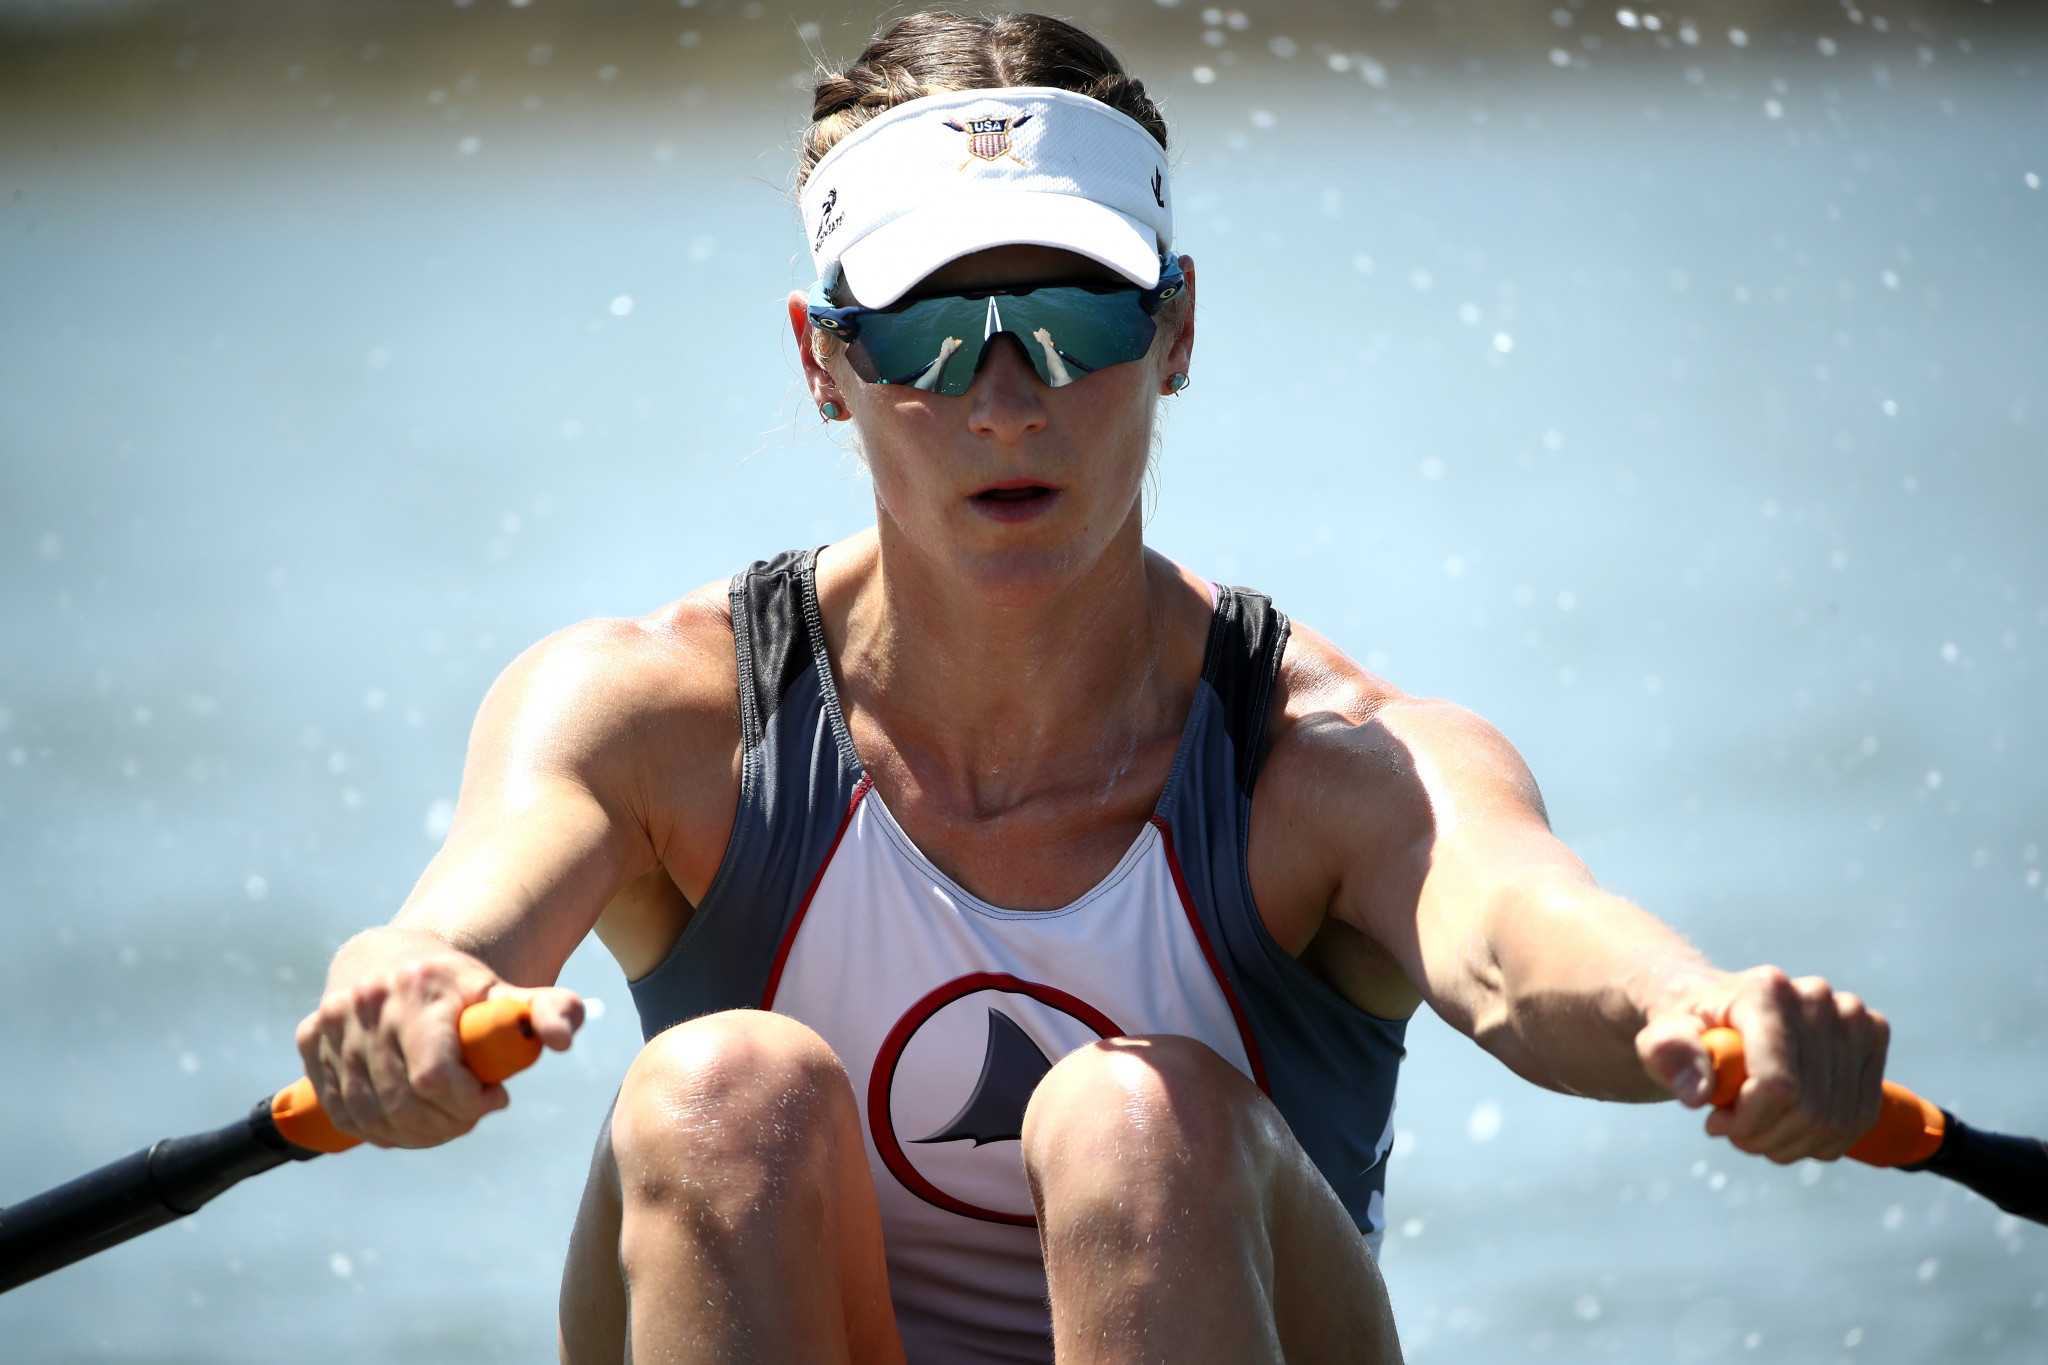 Kohler takes first spot on US Olympic rowing team for Tokyo 2020